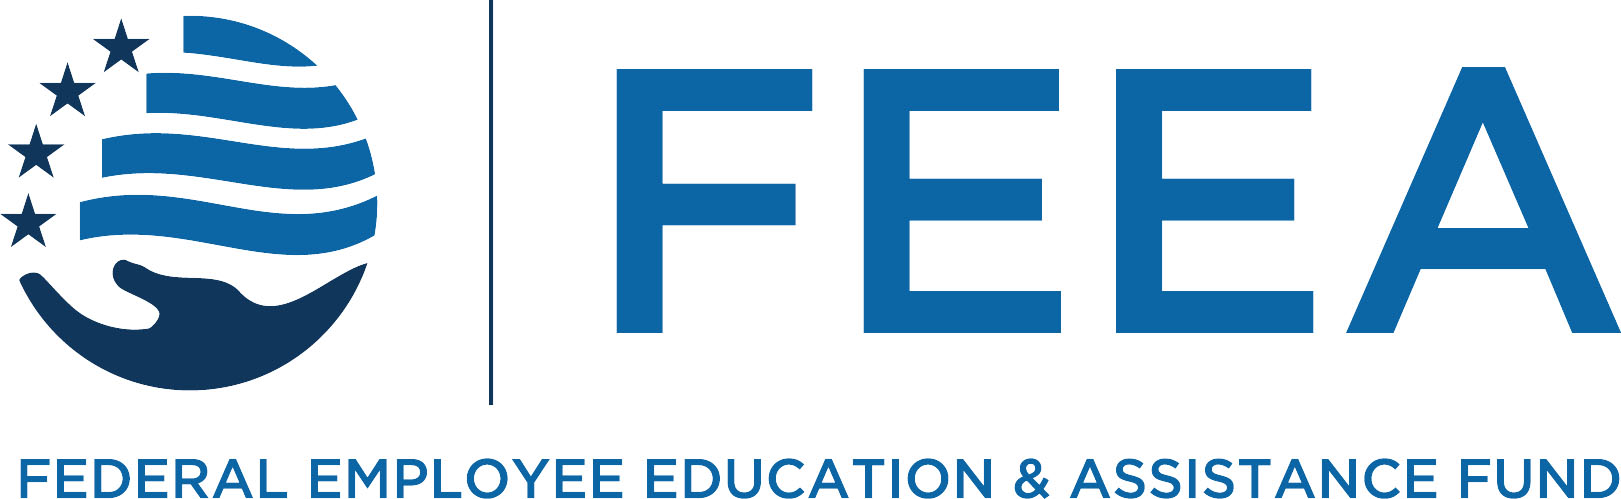 federal employee education and assistance fund